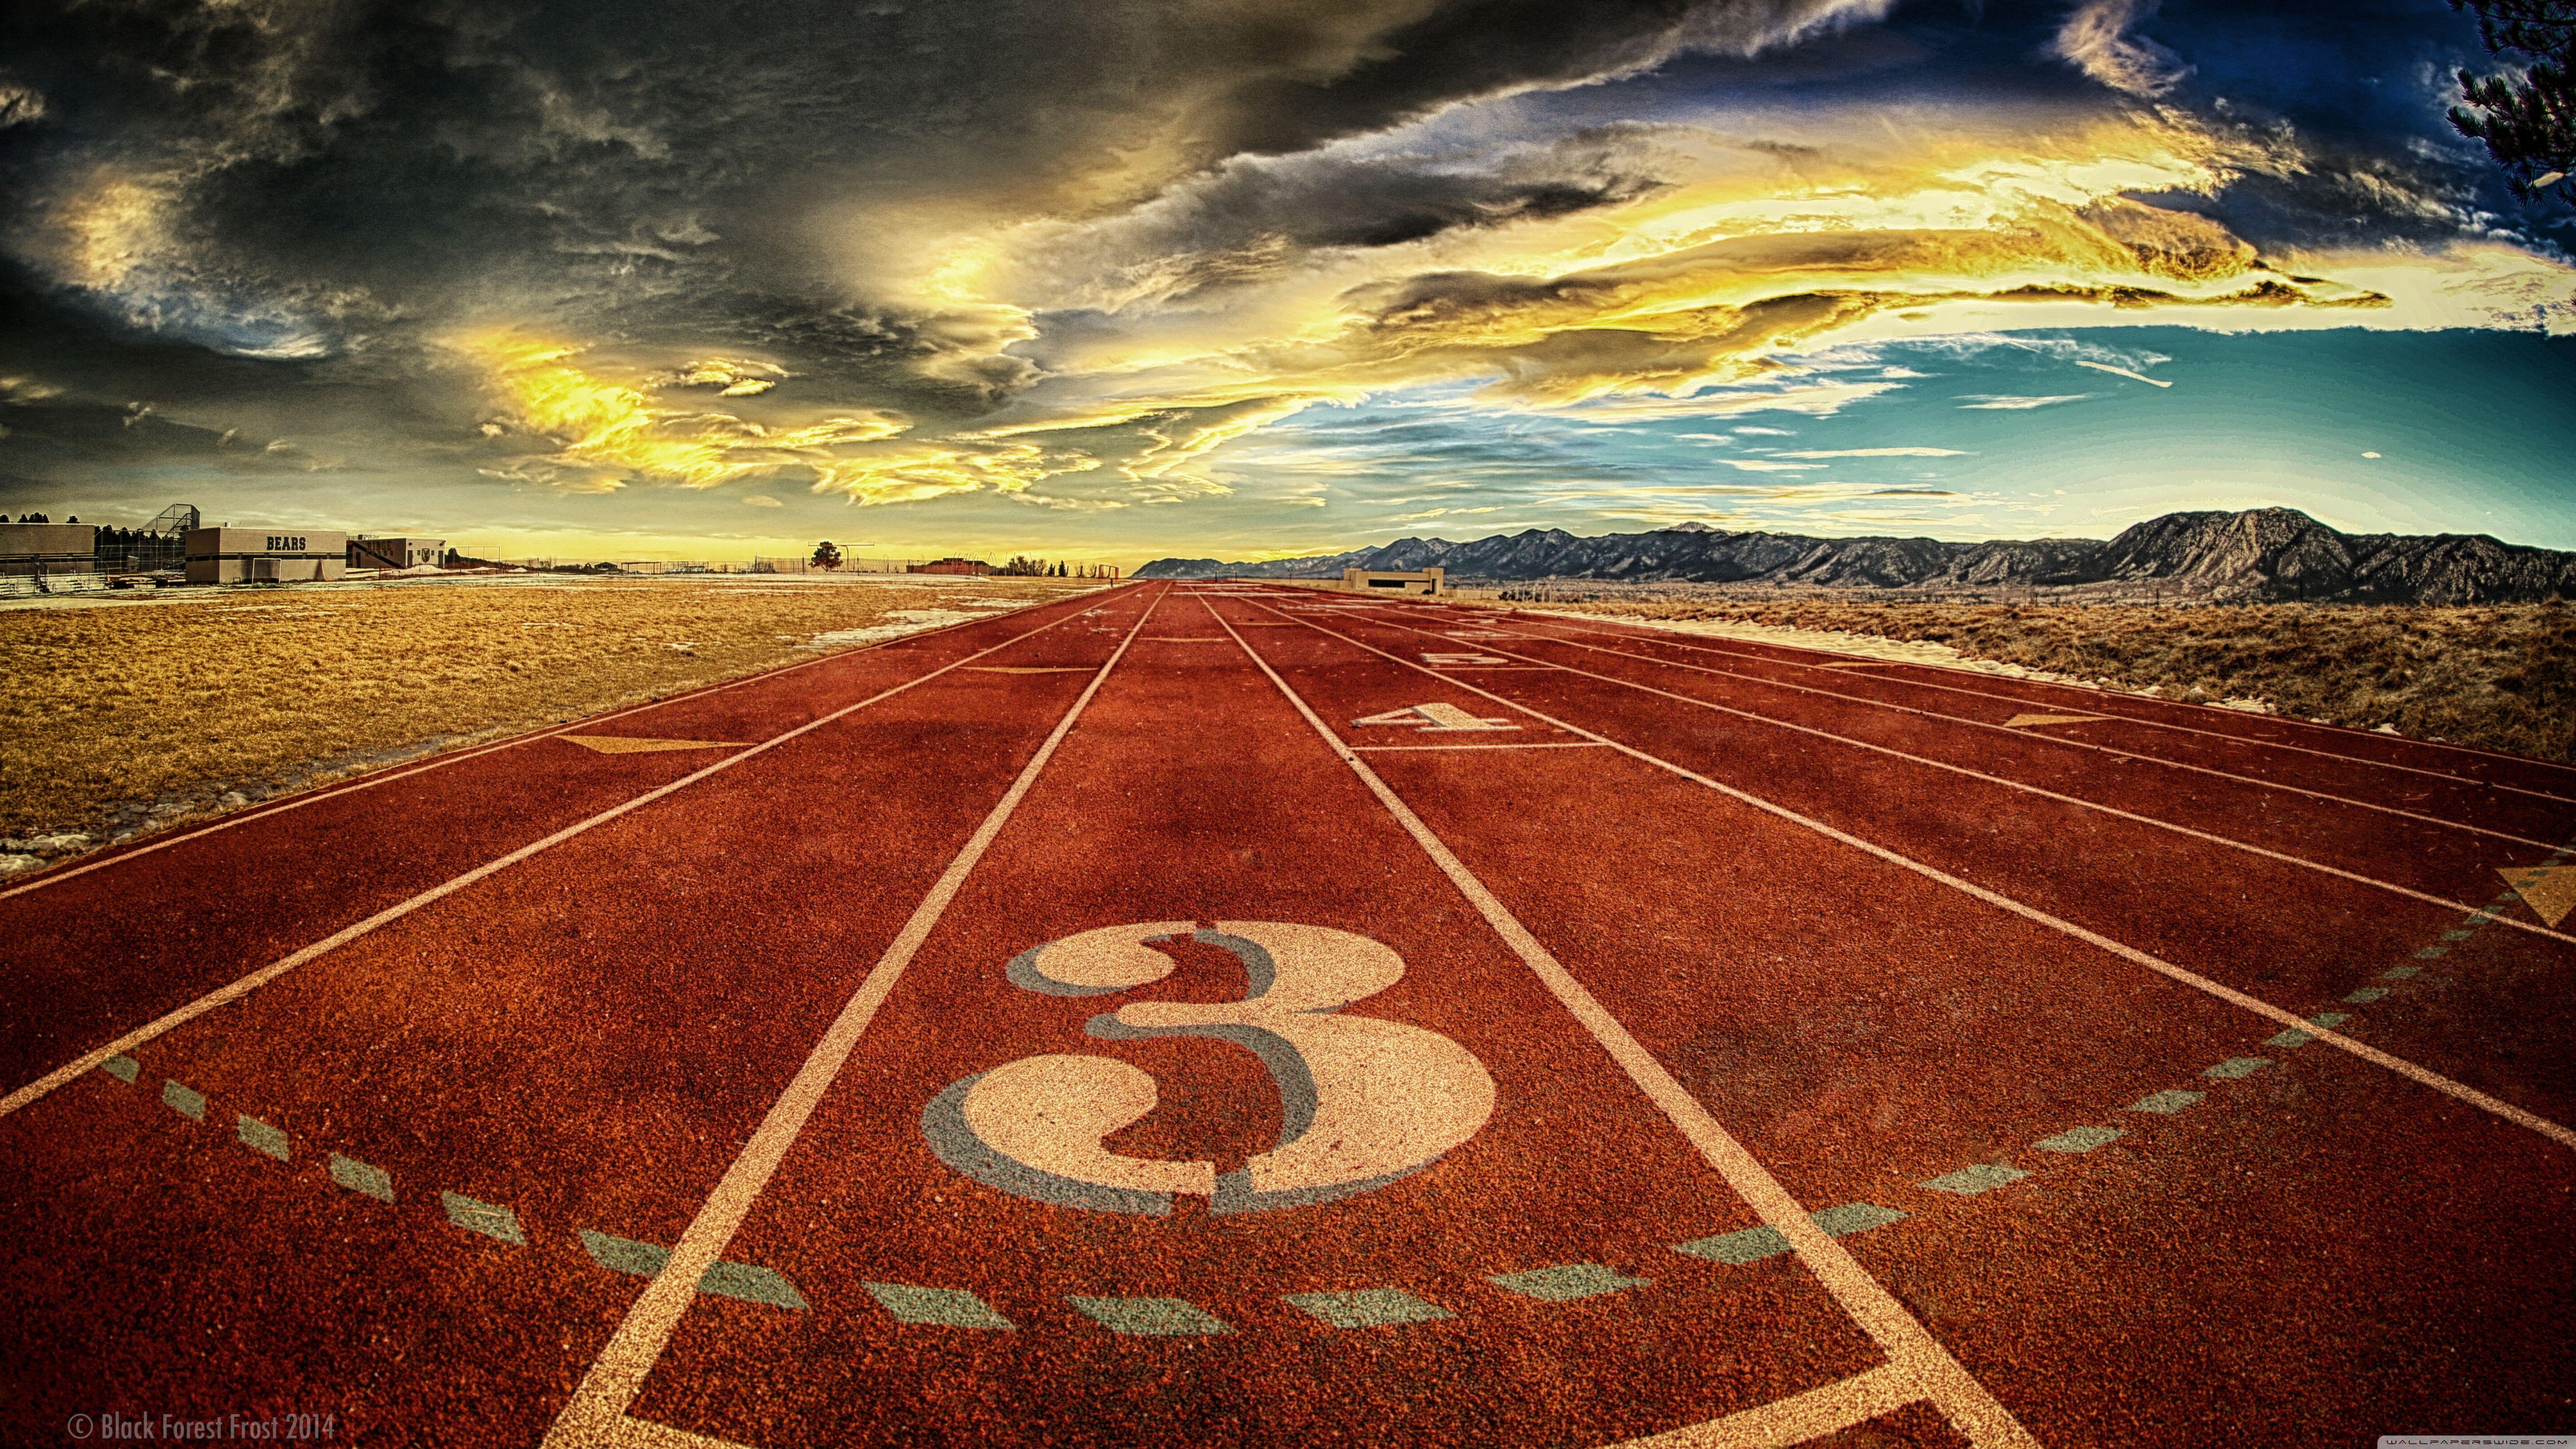 Track And Field Wallpaper Backgrounds. 